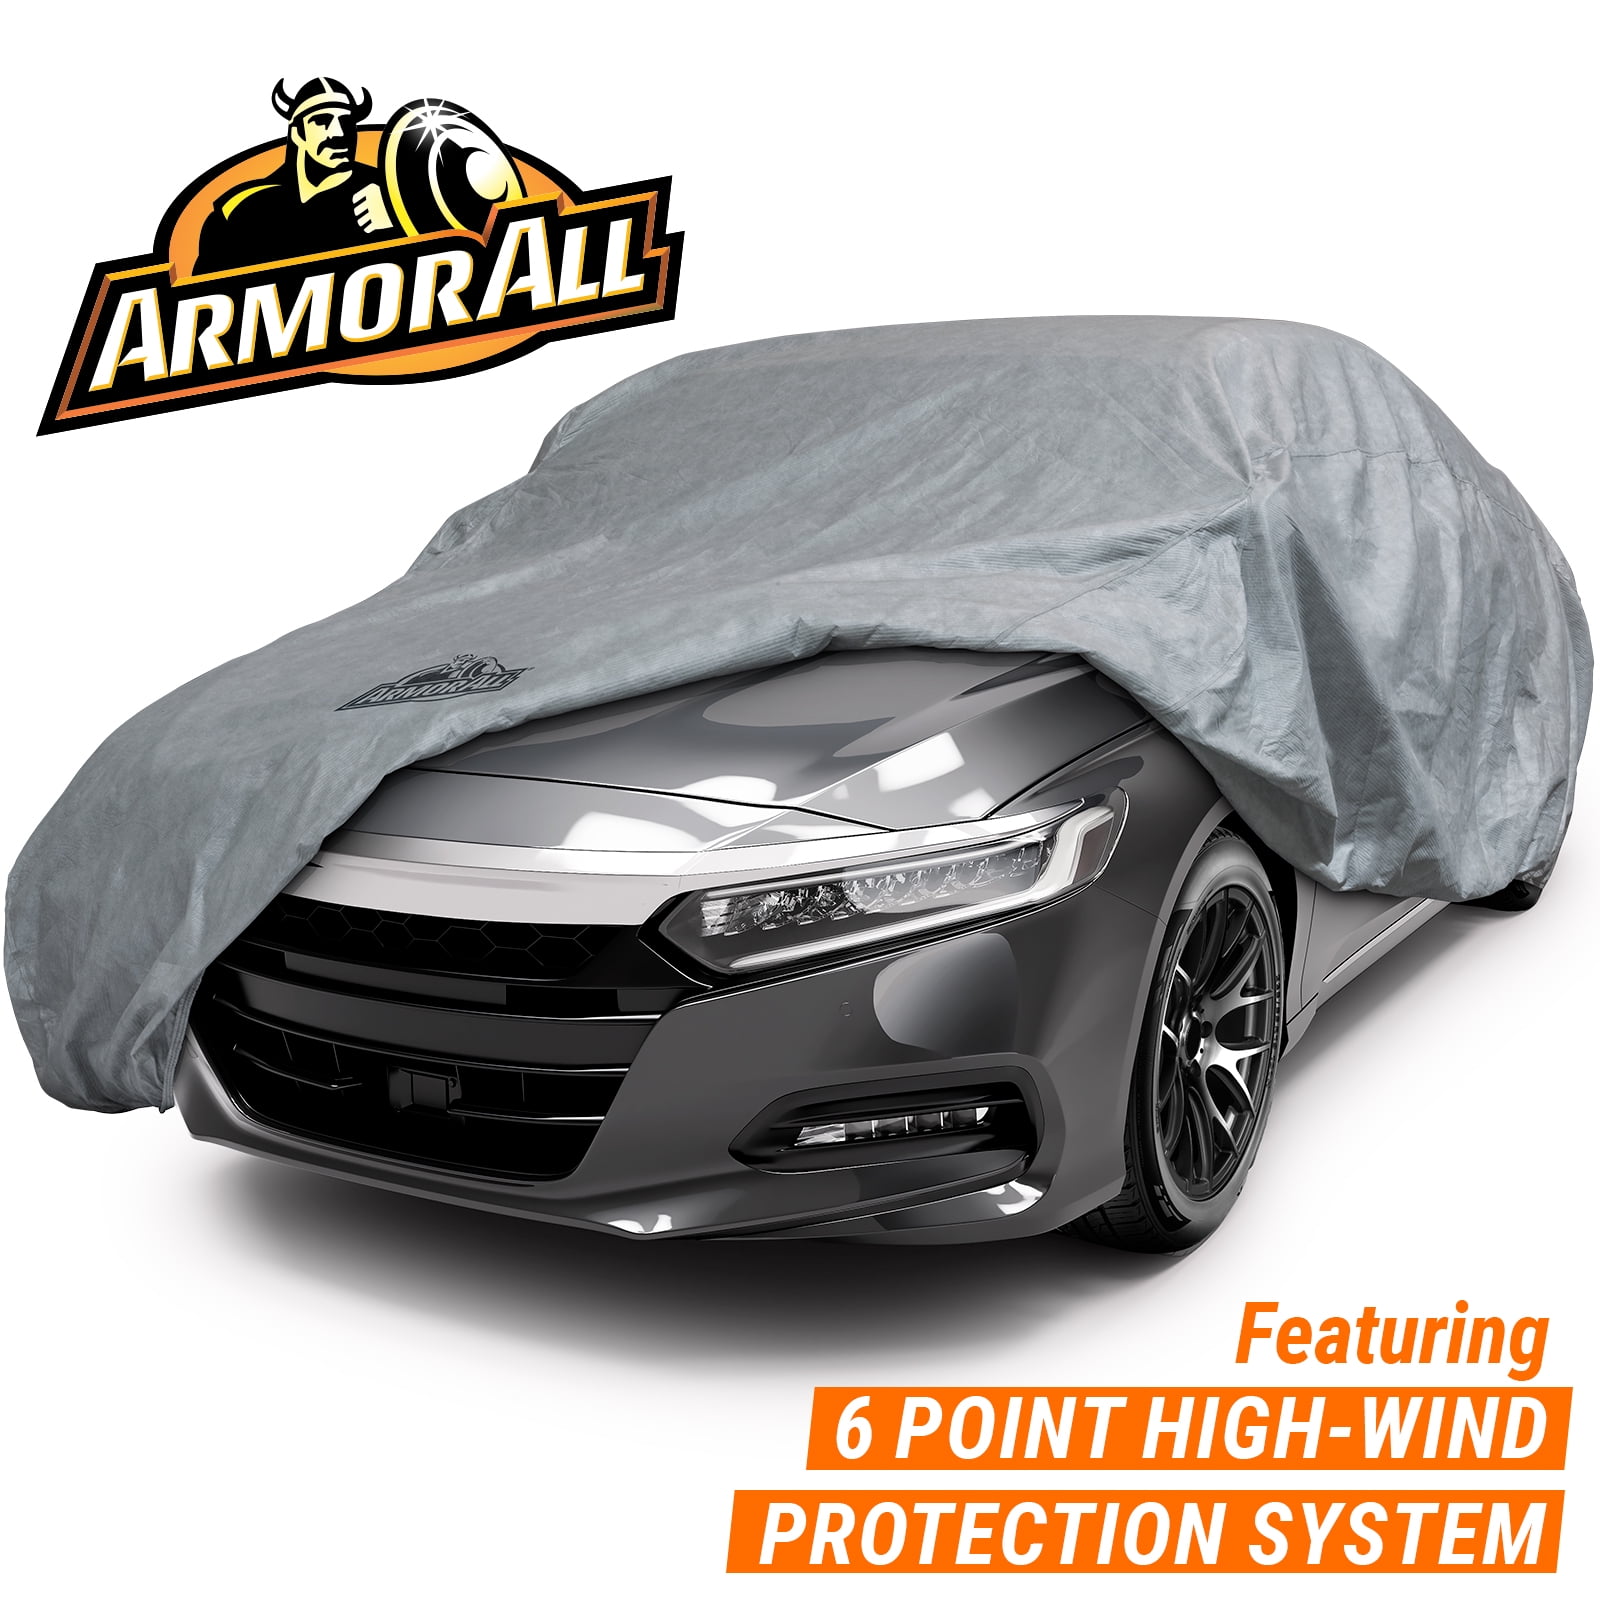 Armor All SUV Cover, Duty Protection, SUVs All Fits to Length Grey up Heavy Weather 186